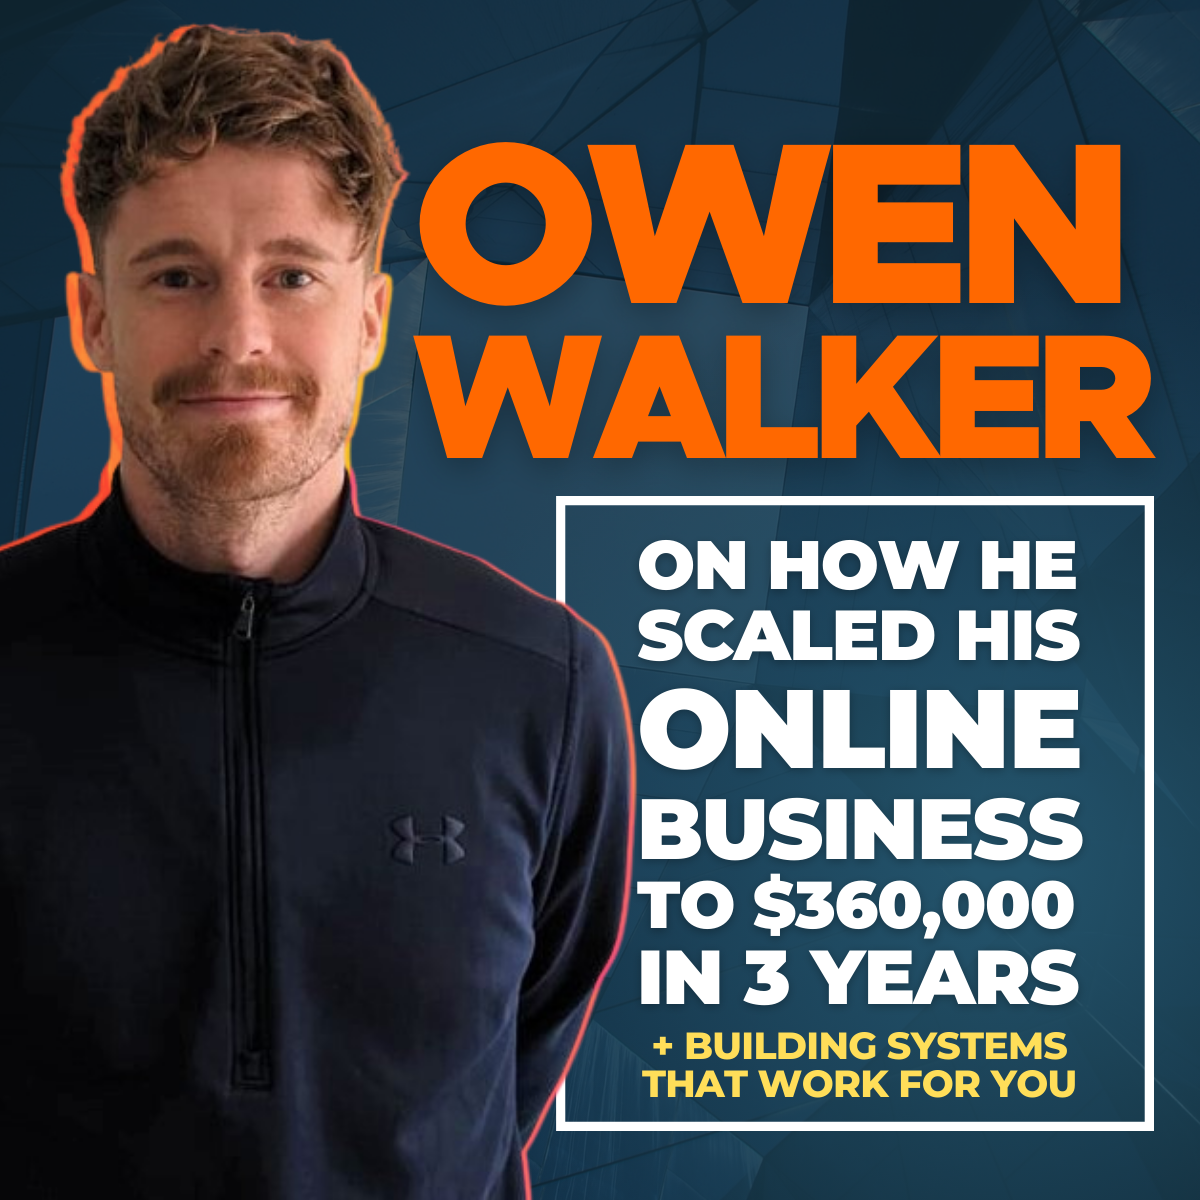 How Owen Walker scaled his online business to $360,000 in 3 years + building systems that work for you